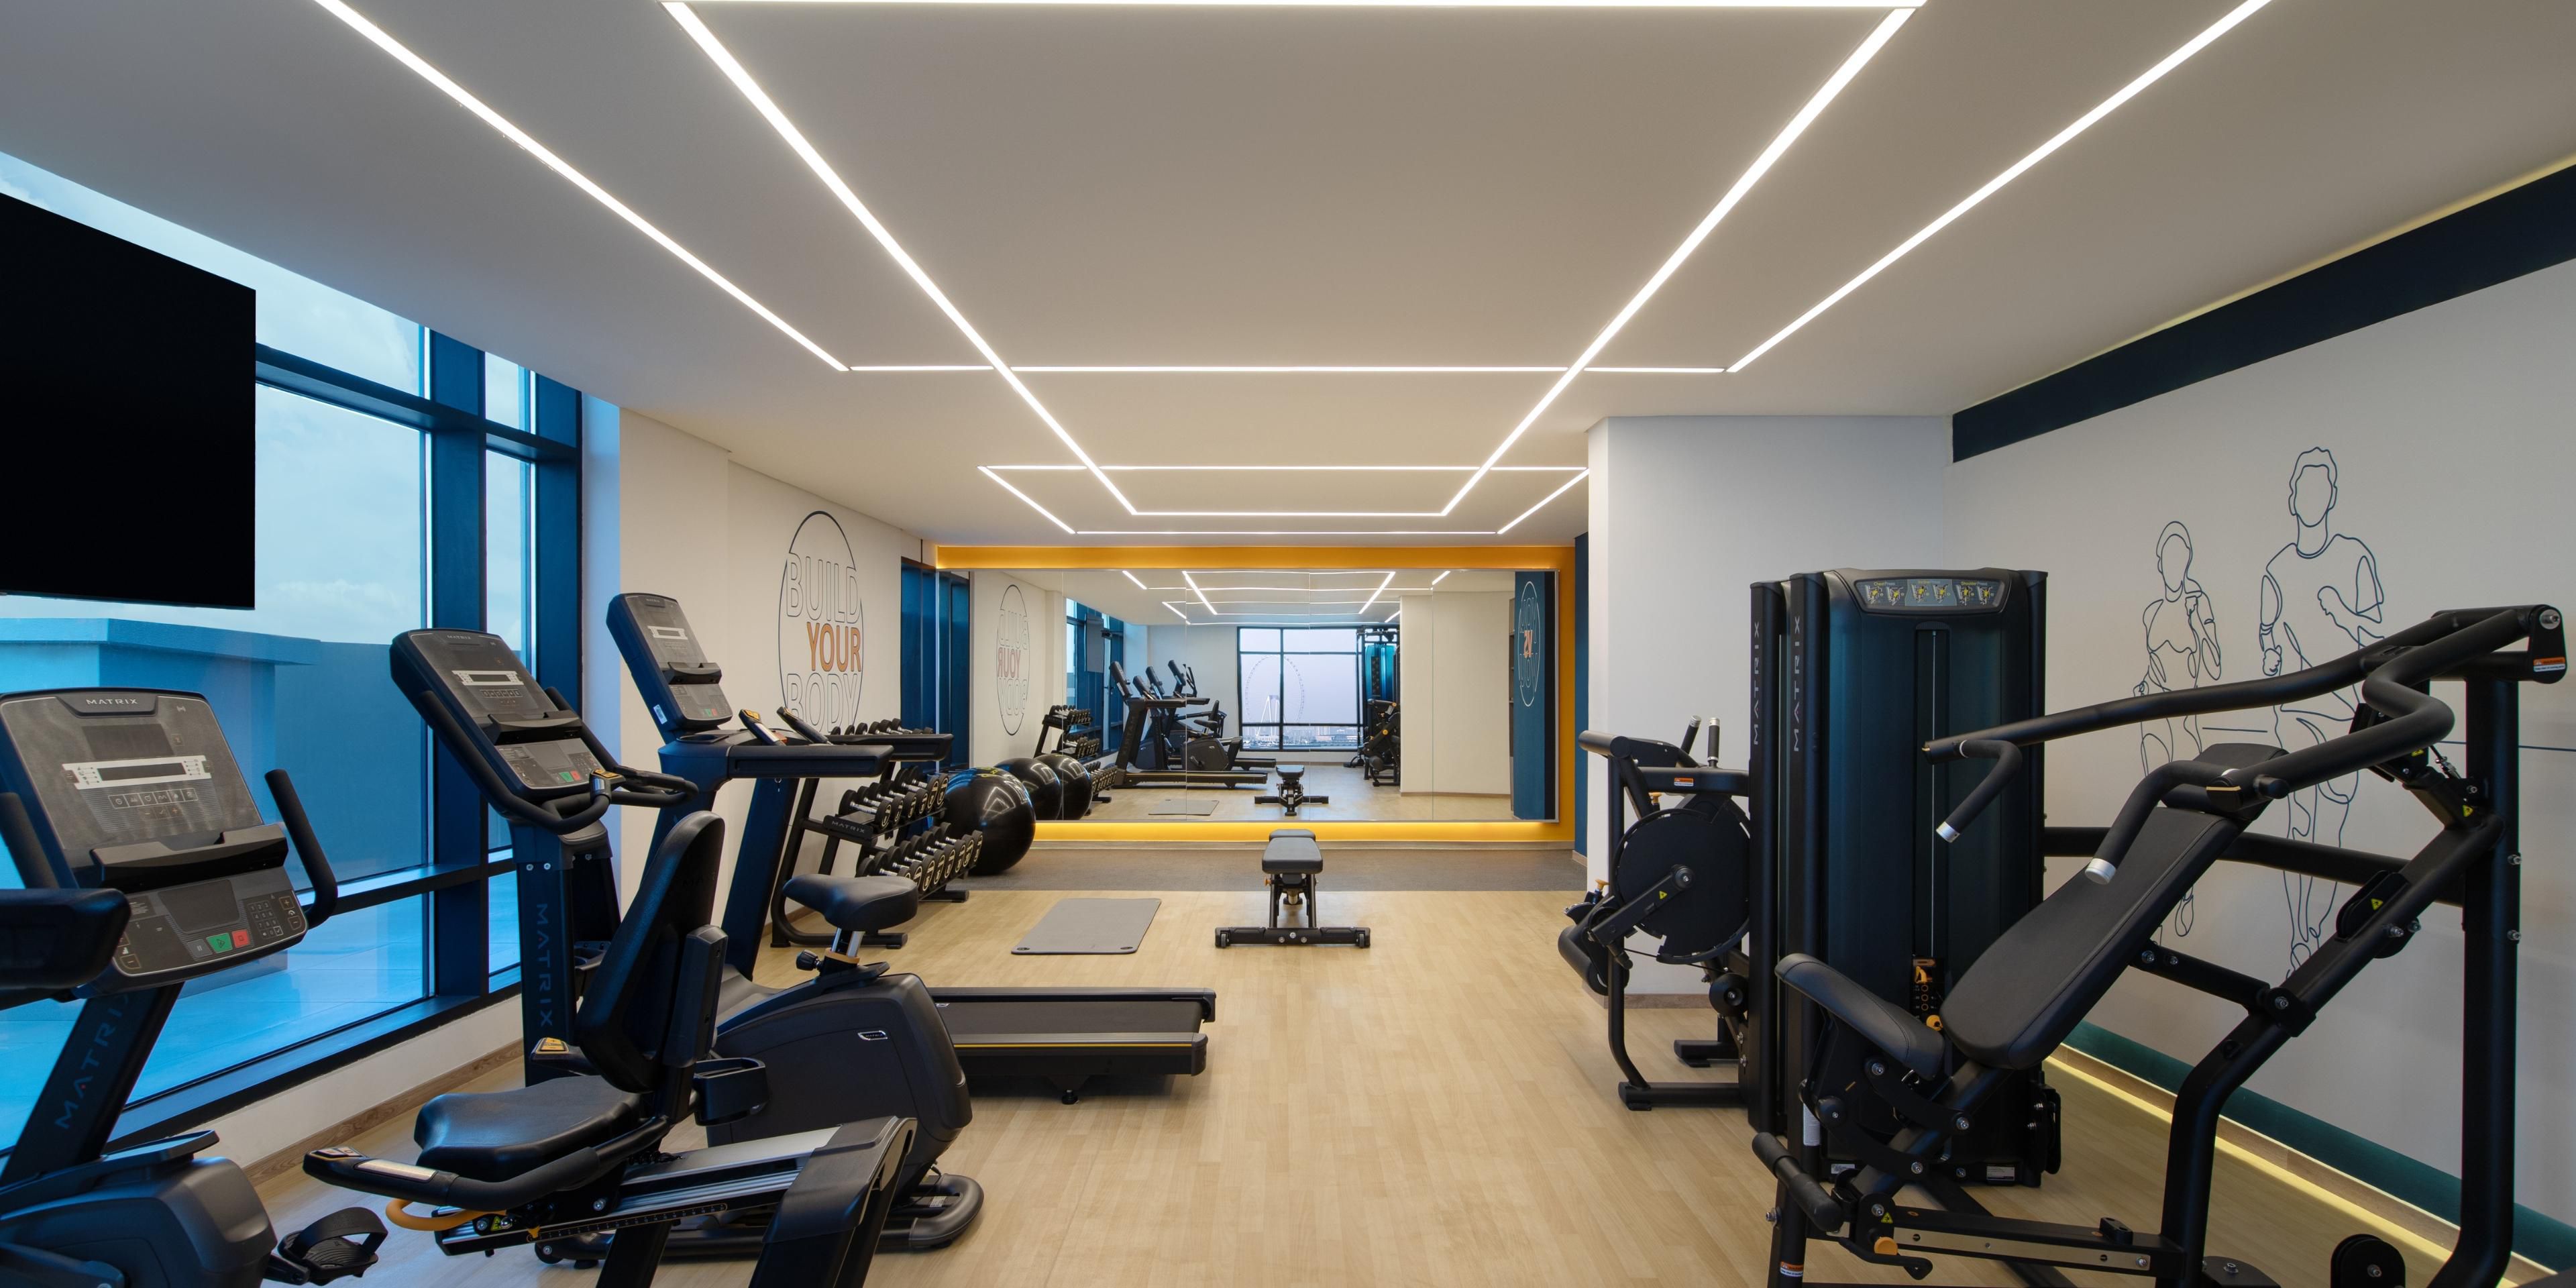 A fully-equipped gym to help you with your workouts is located on the 9th floor. Our personal trainers can guide you while making your workout routines enjoyable. From strength training to endurance, from aerobic training to cycling, you can do it all.